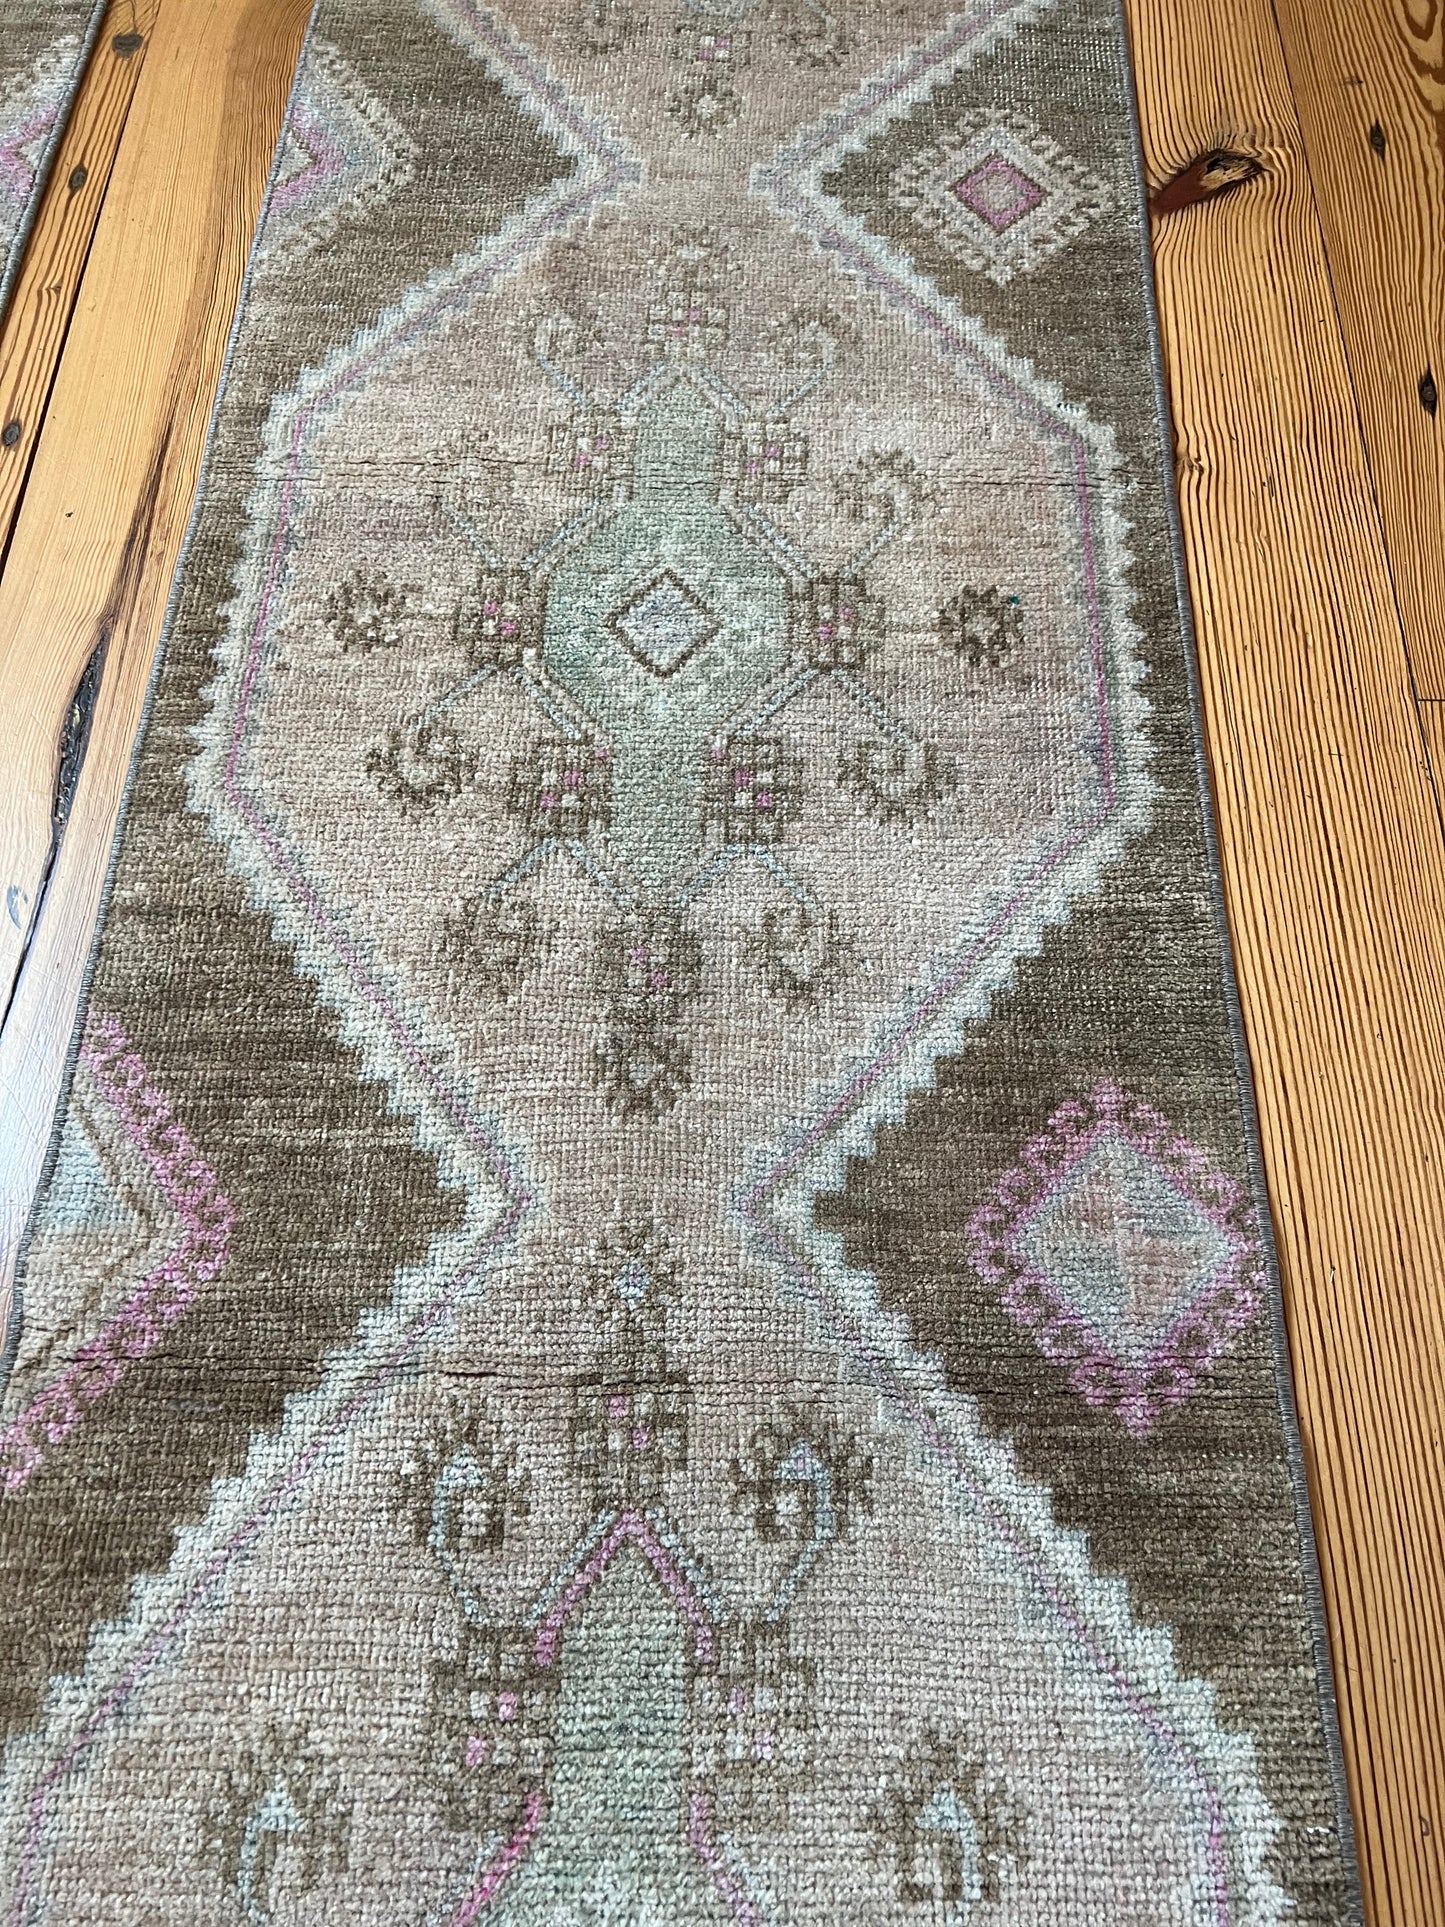 1 of 2 Matching Long Runners with Brown 2' x 13'8"